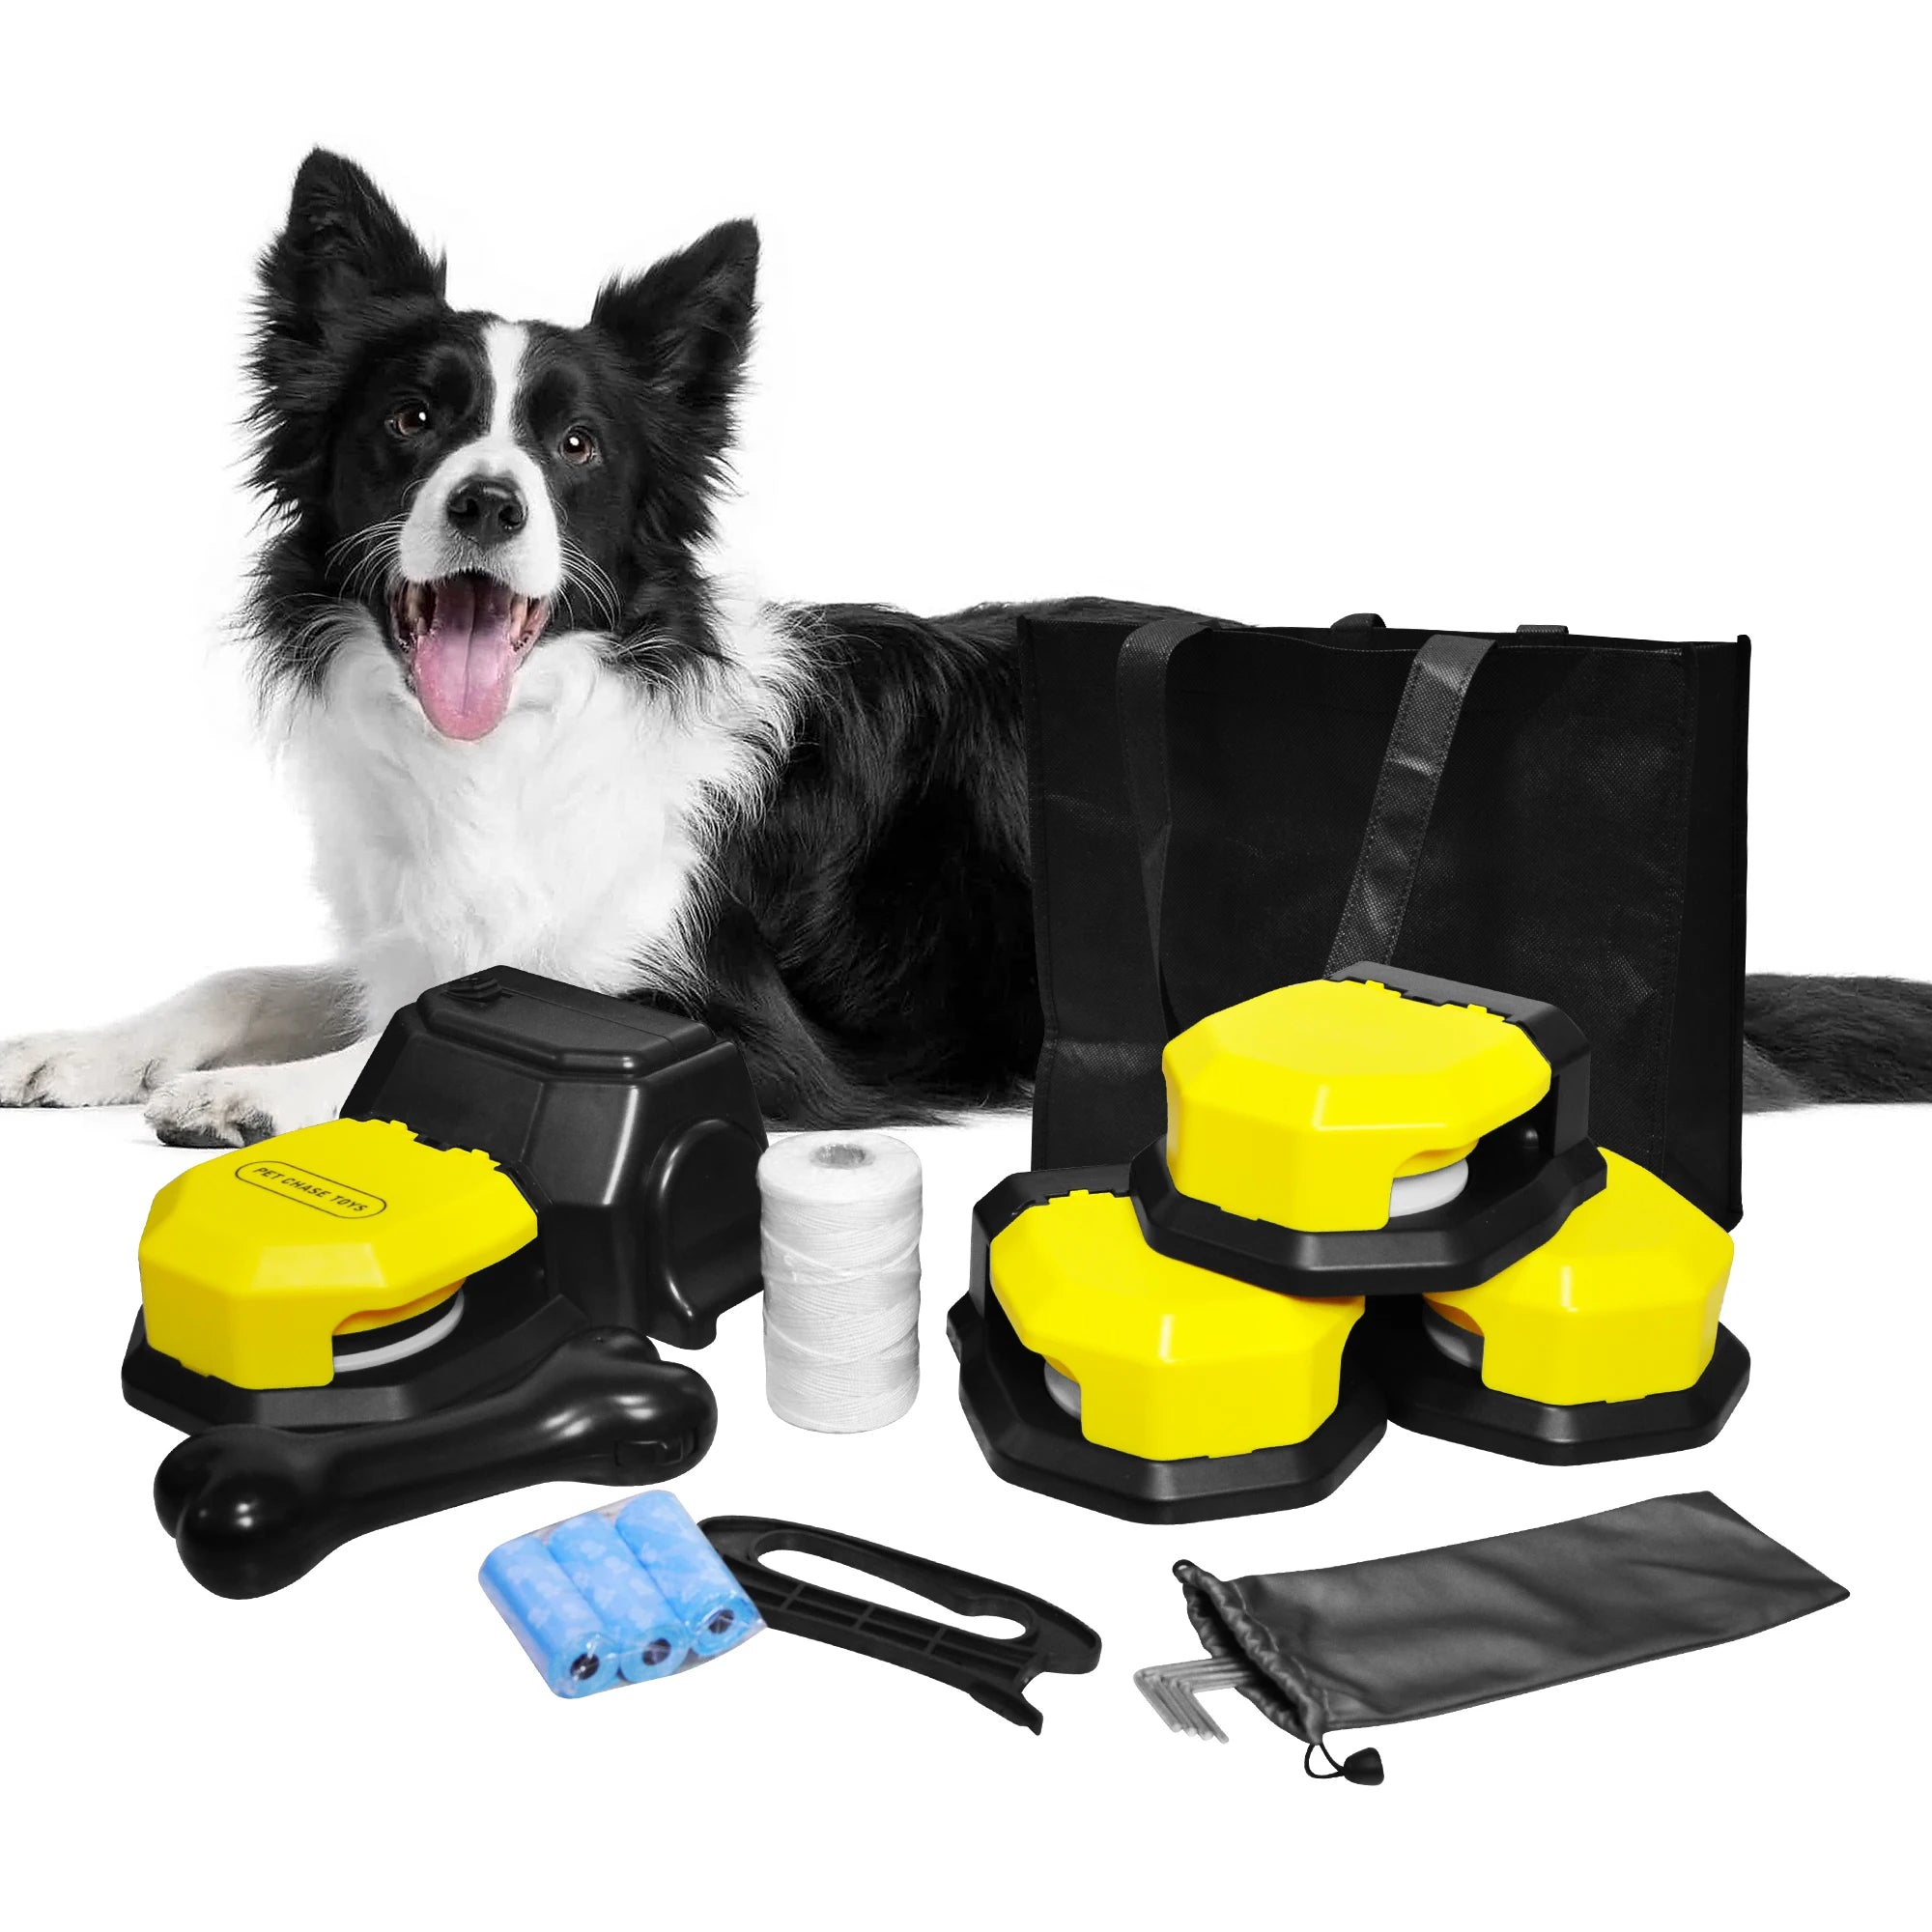 A black and yellow dog is laying next to a bag of supplies, showcasing its fitter lifestyle.